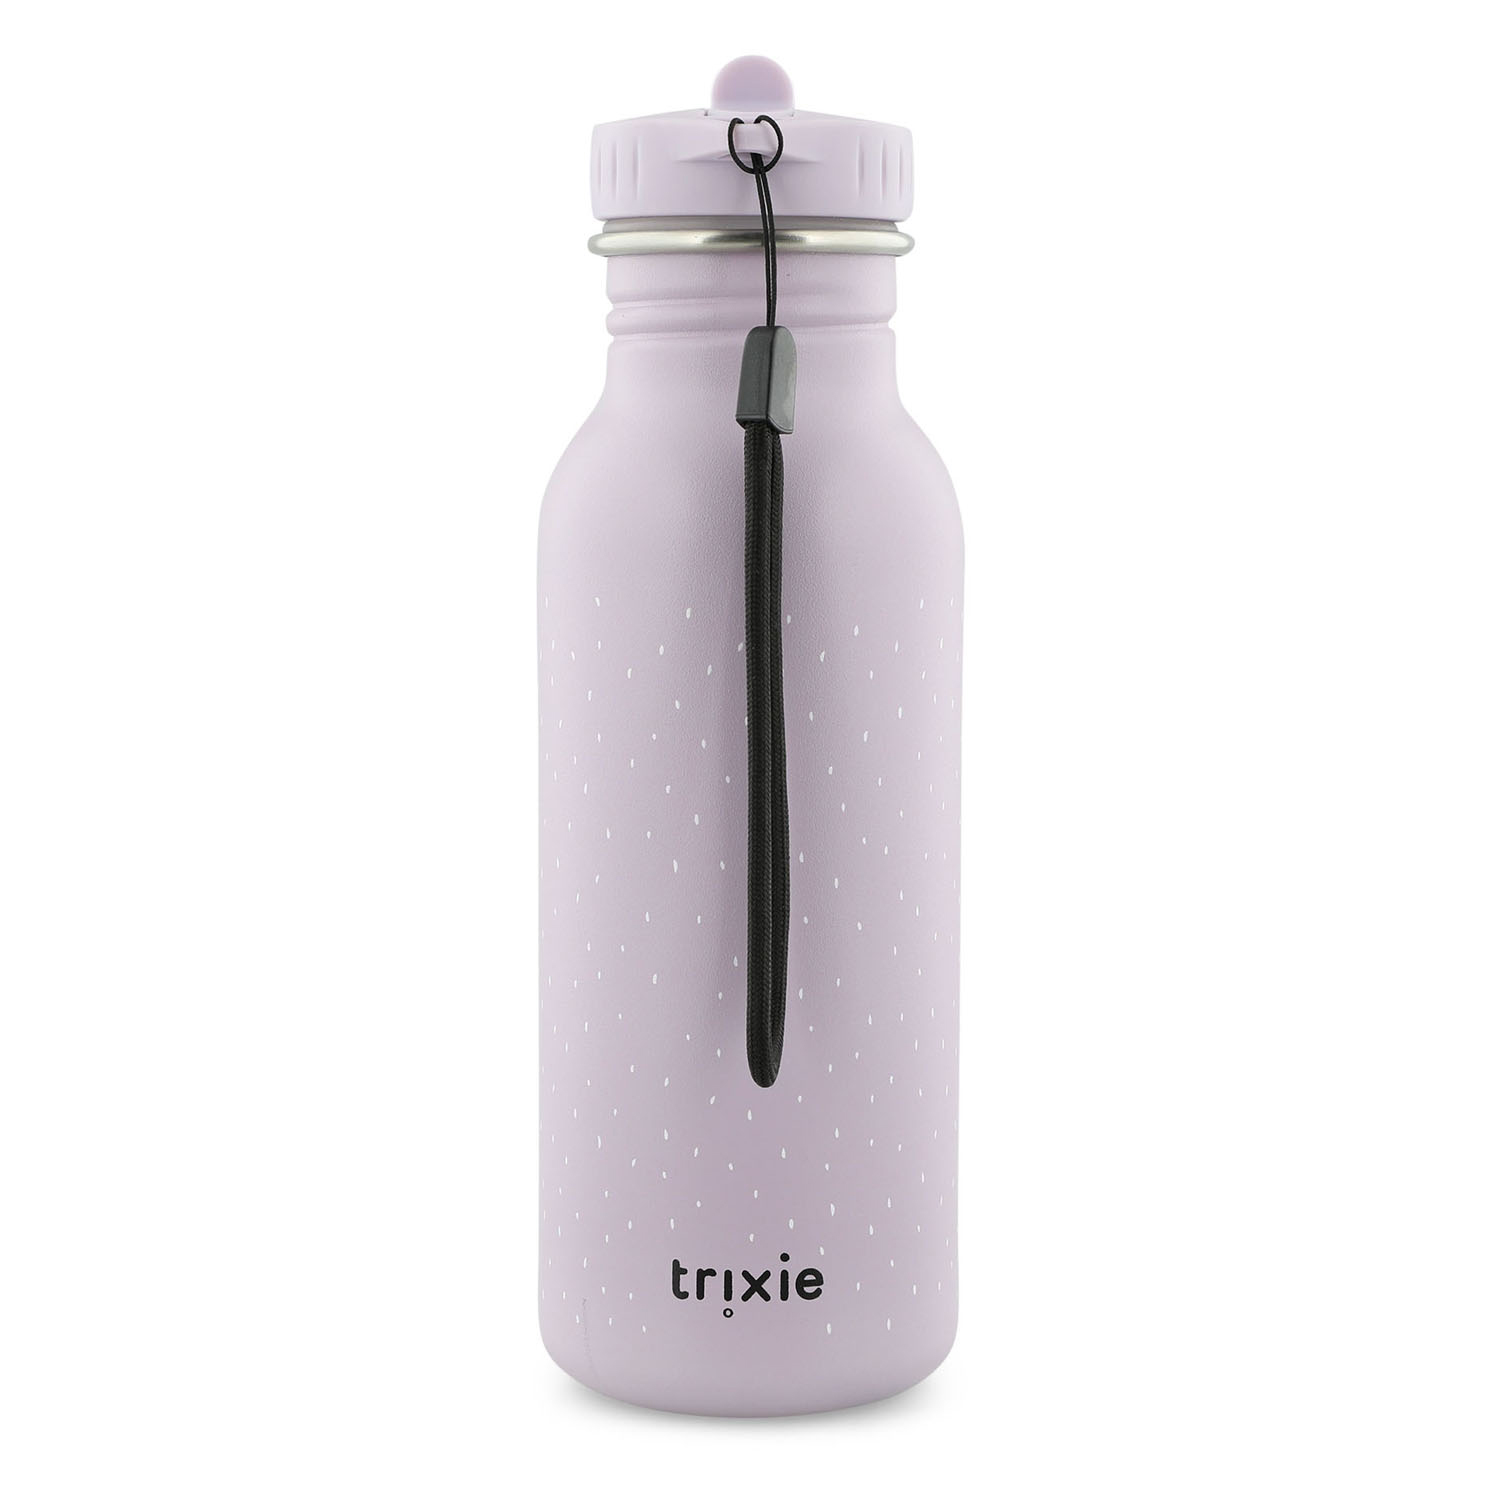 Trixie Drinkfles - Mrs. Mouse, 500ml 